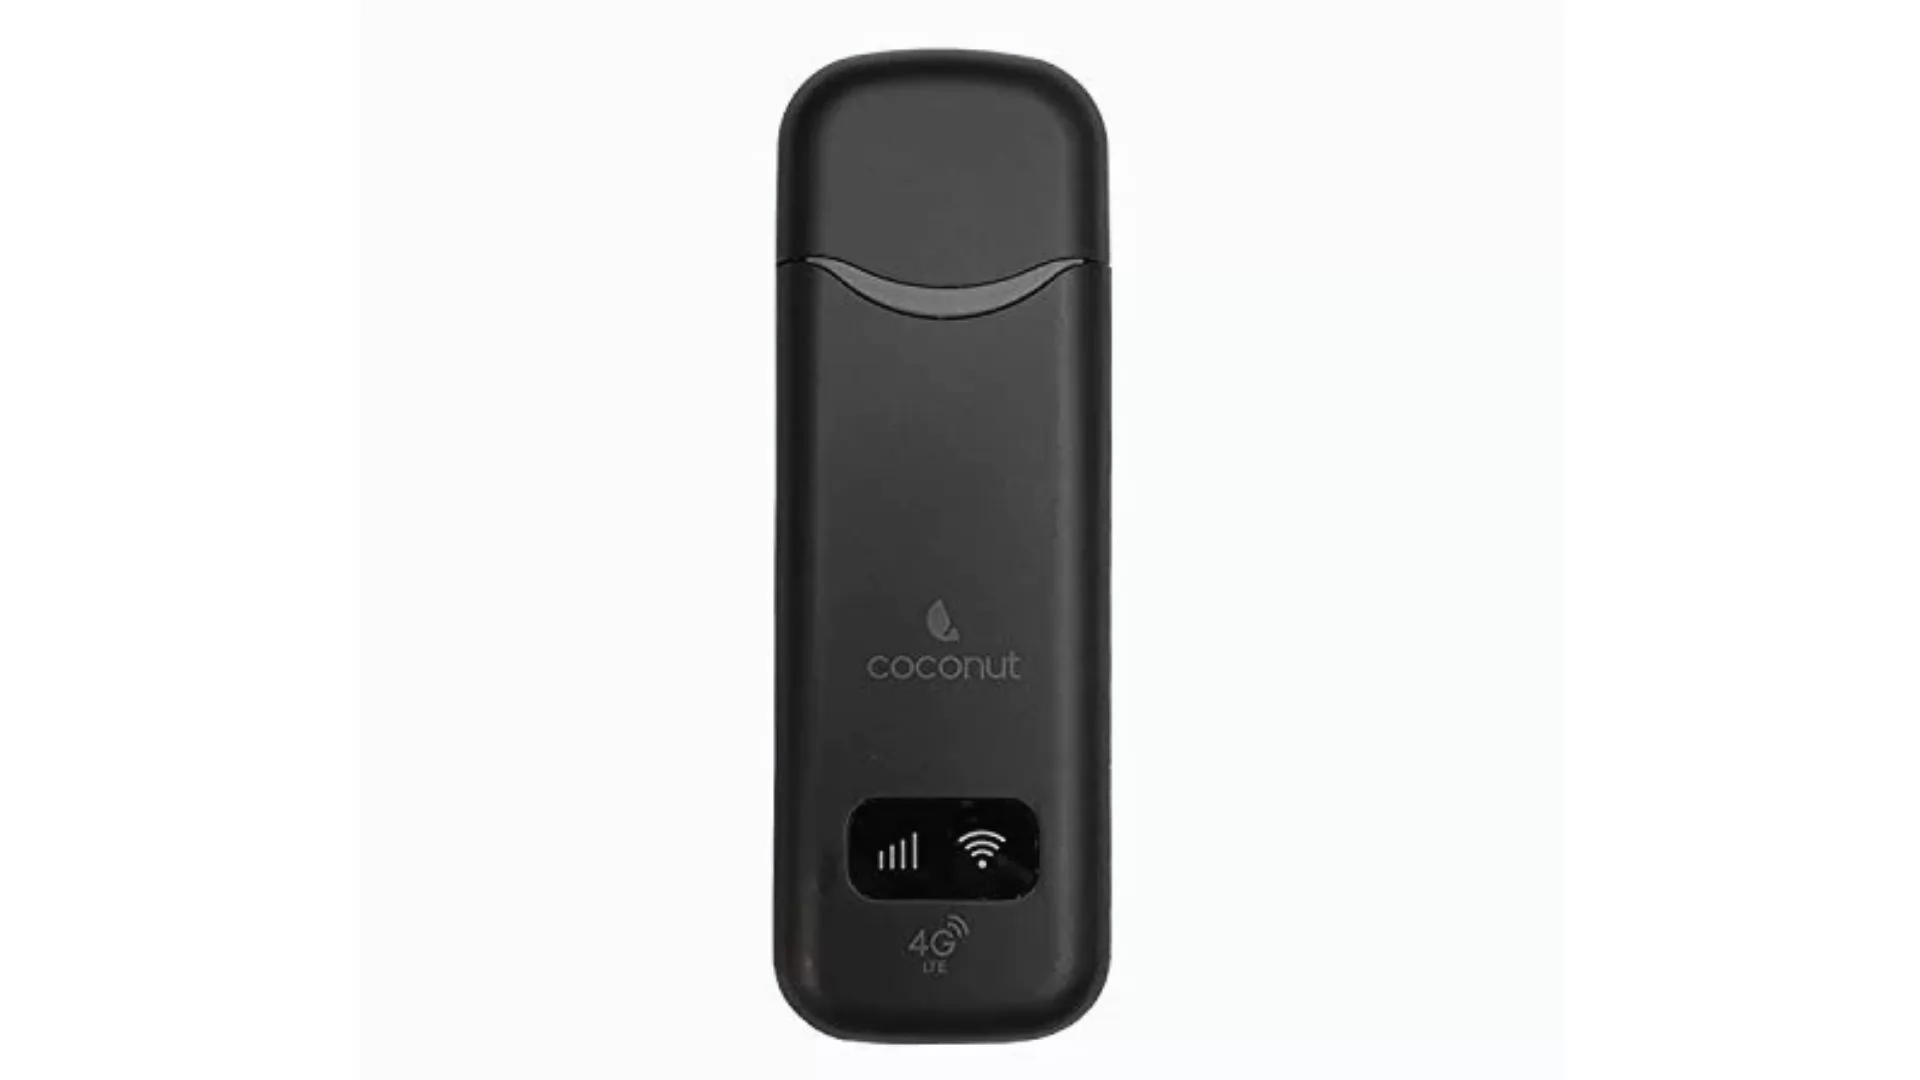 Coconut WUD04 4G Dongle With All SIM Support